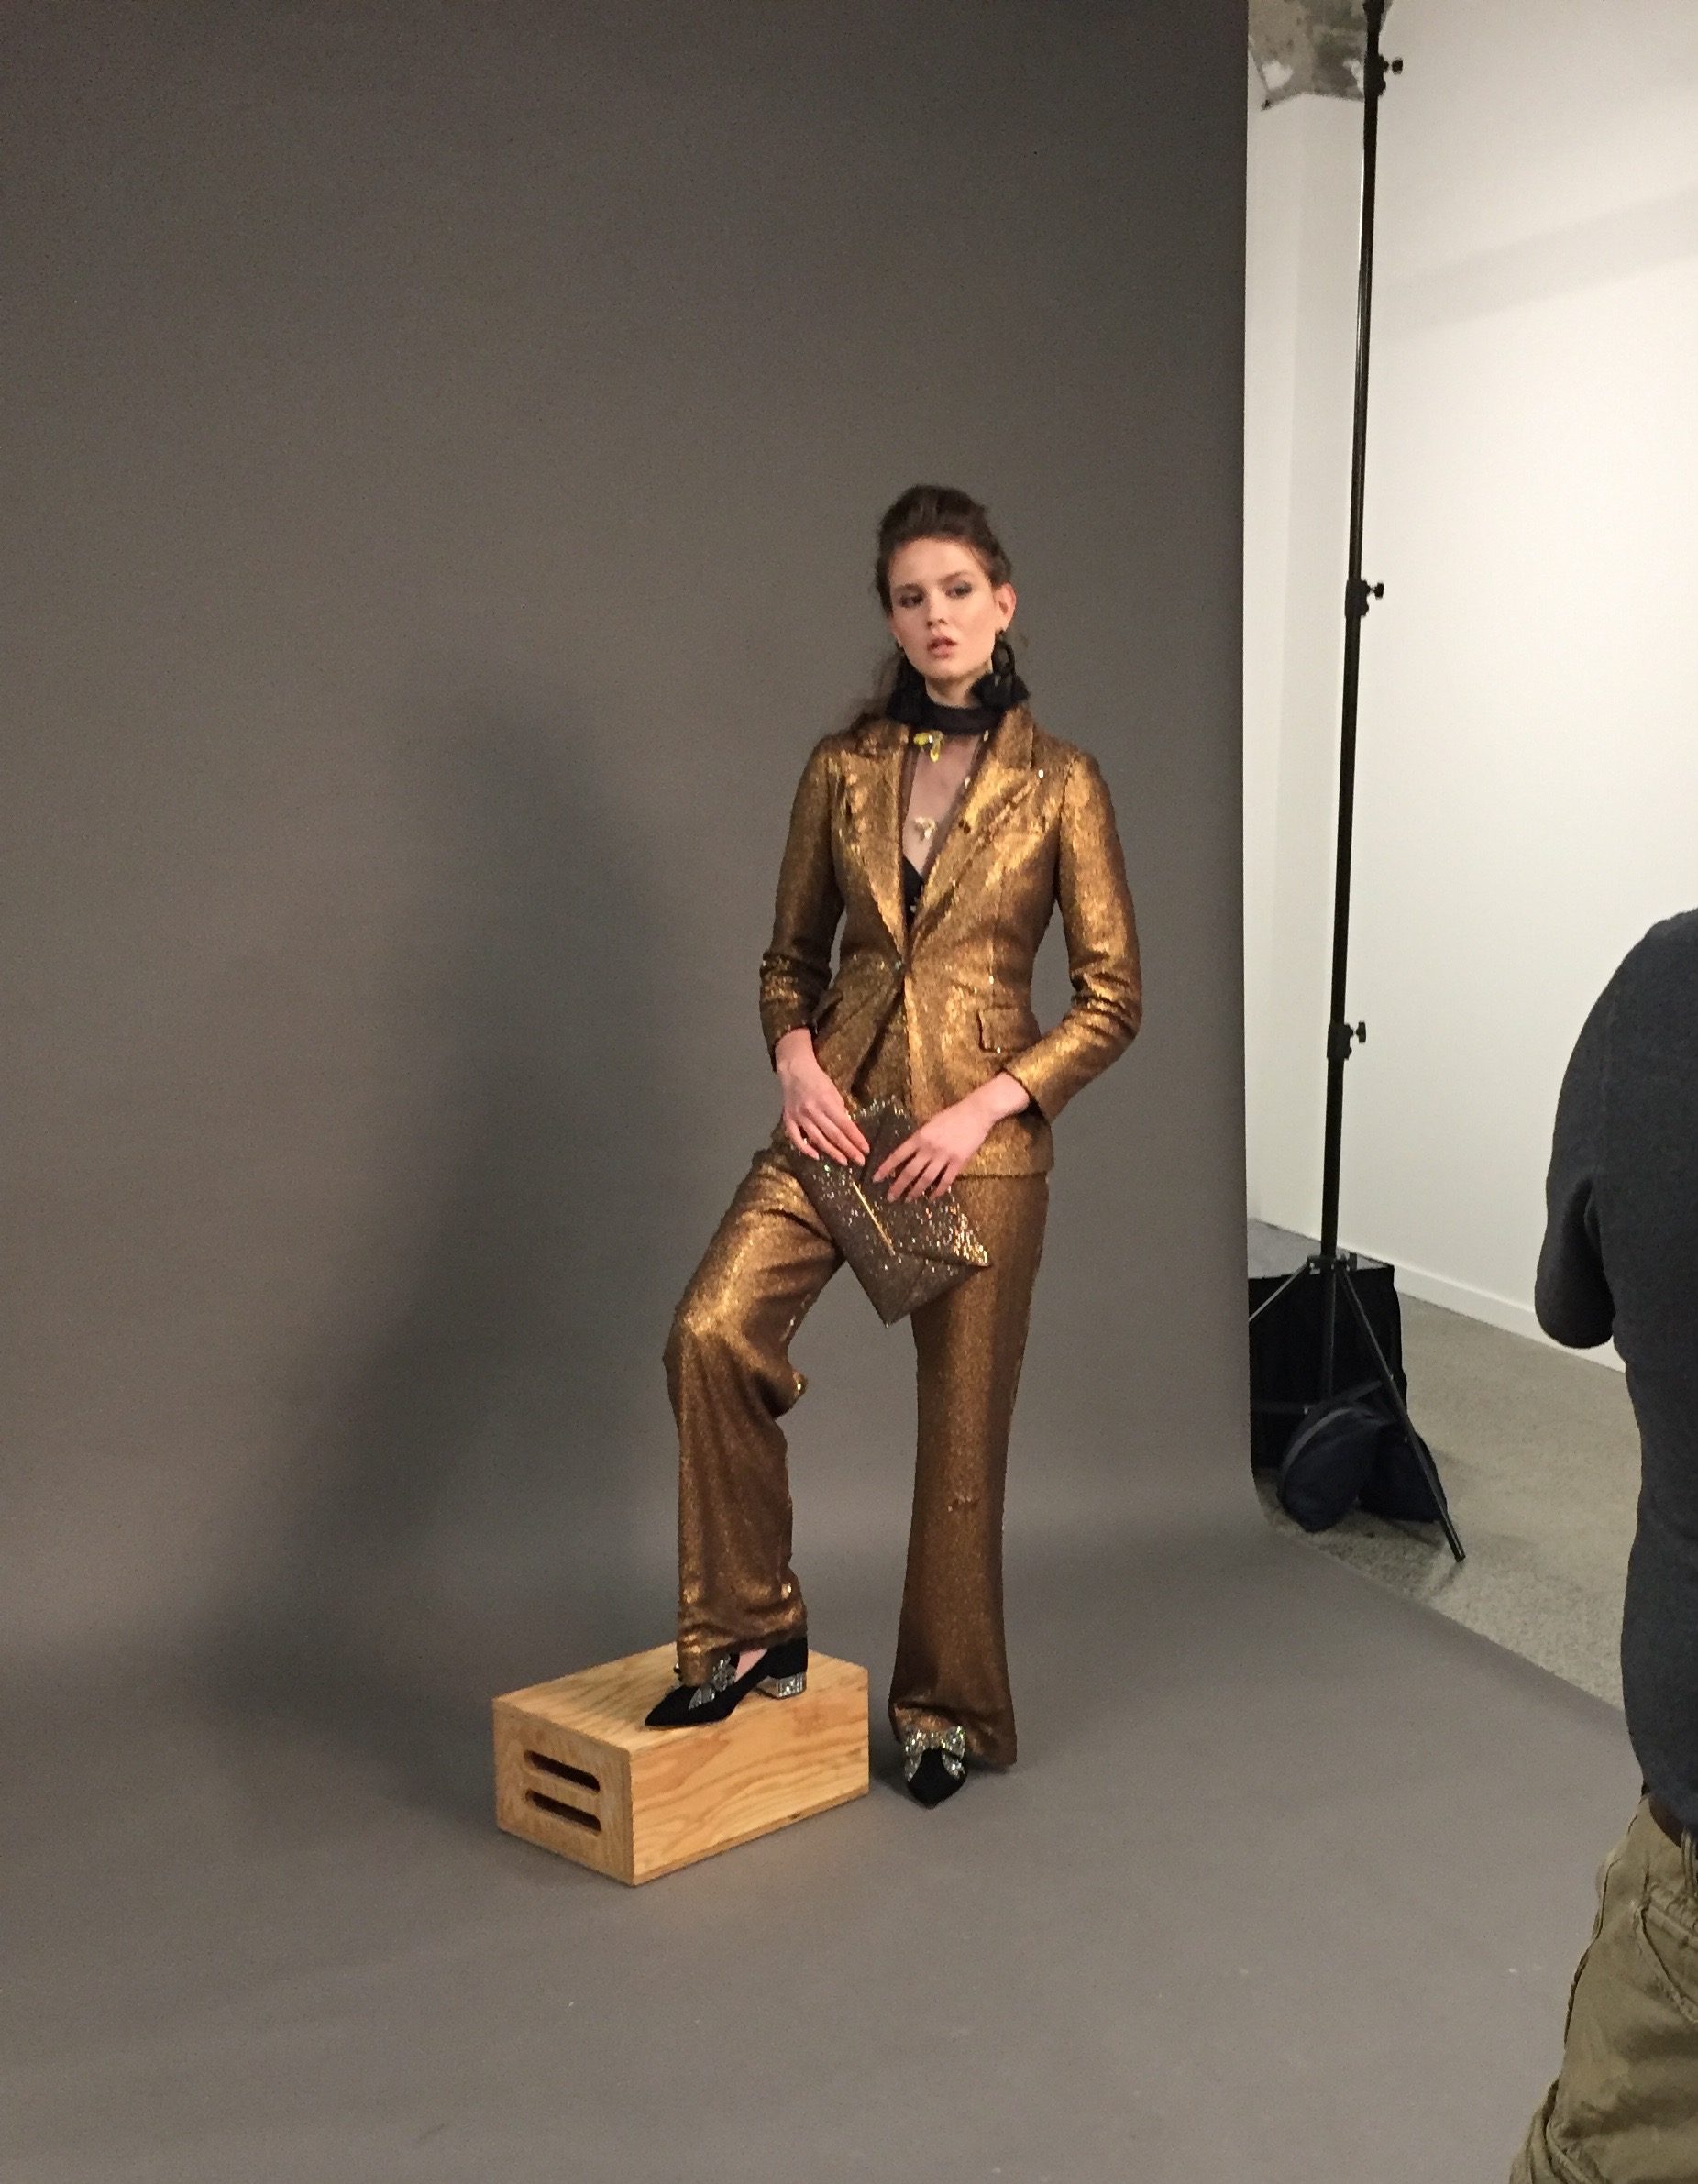 A model in gold suit posing during a photo shoot.